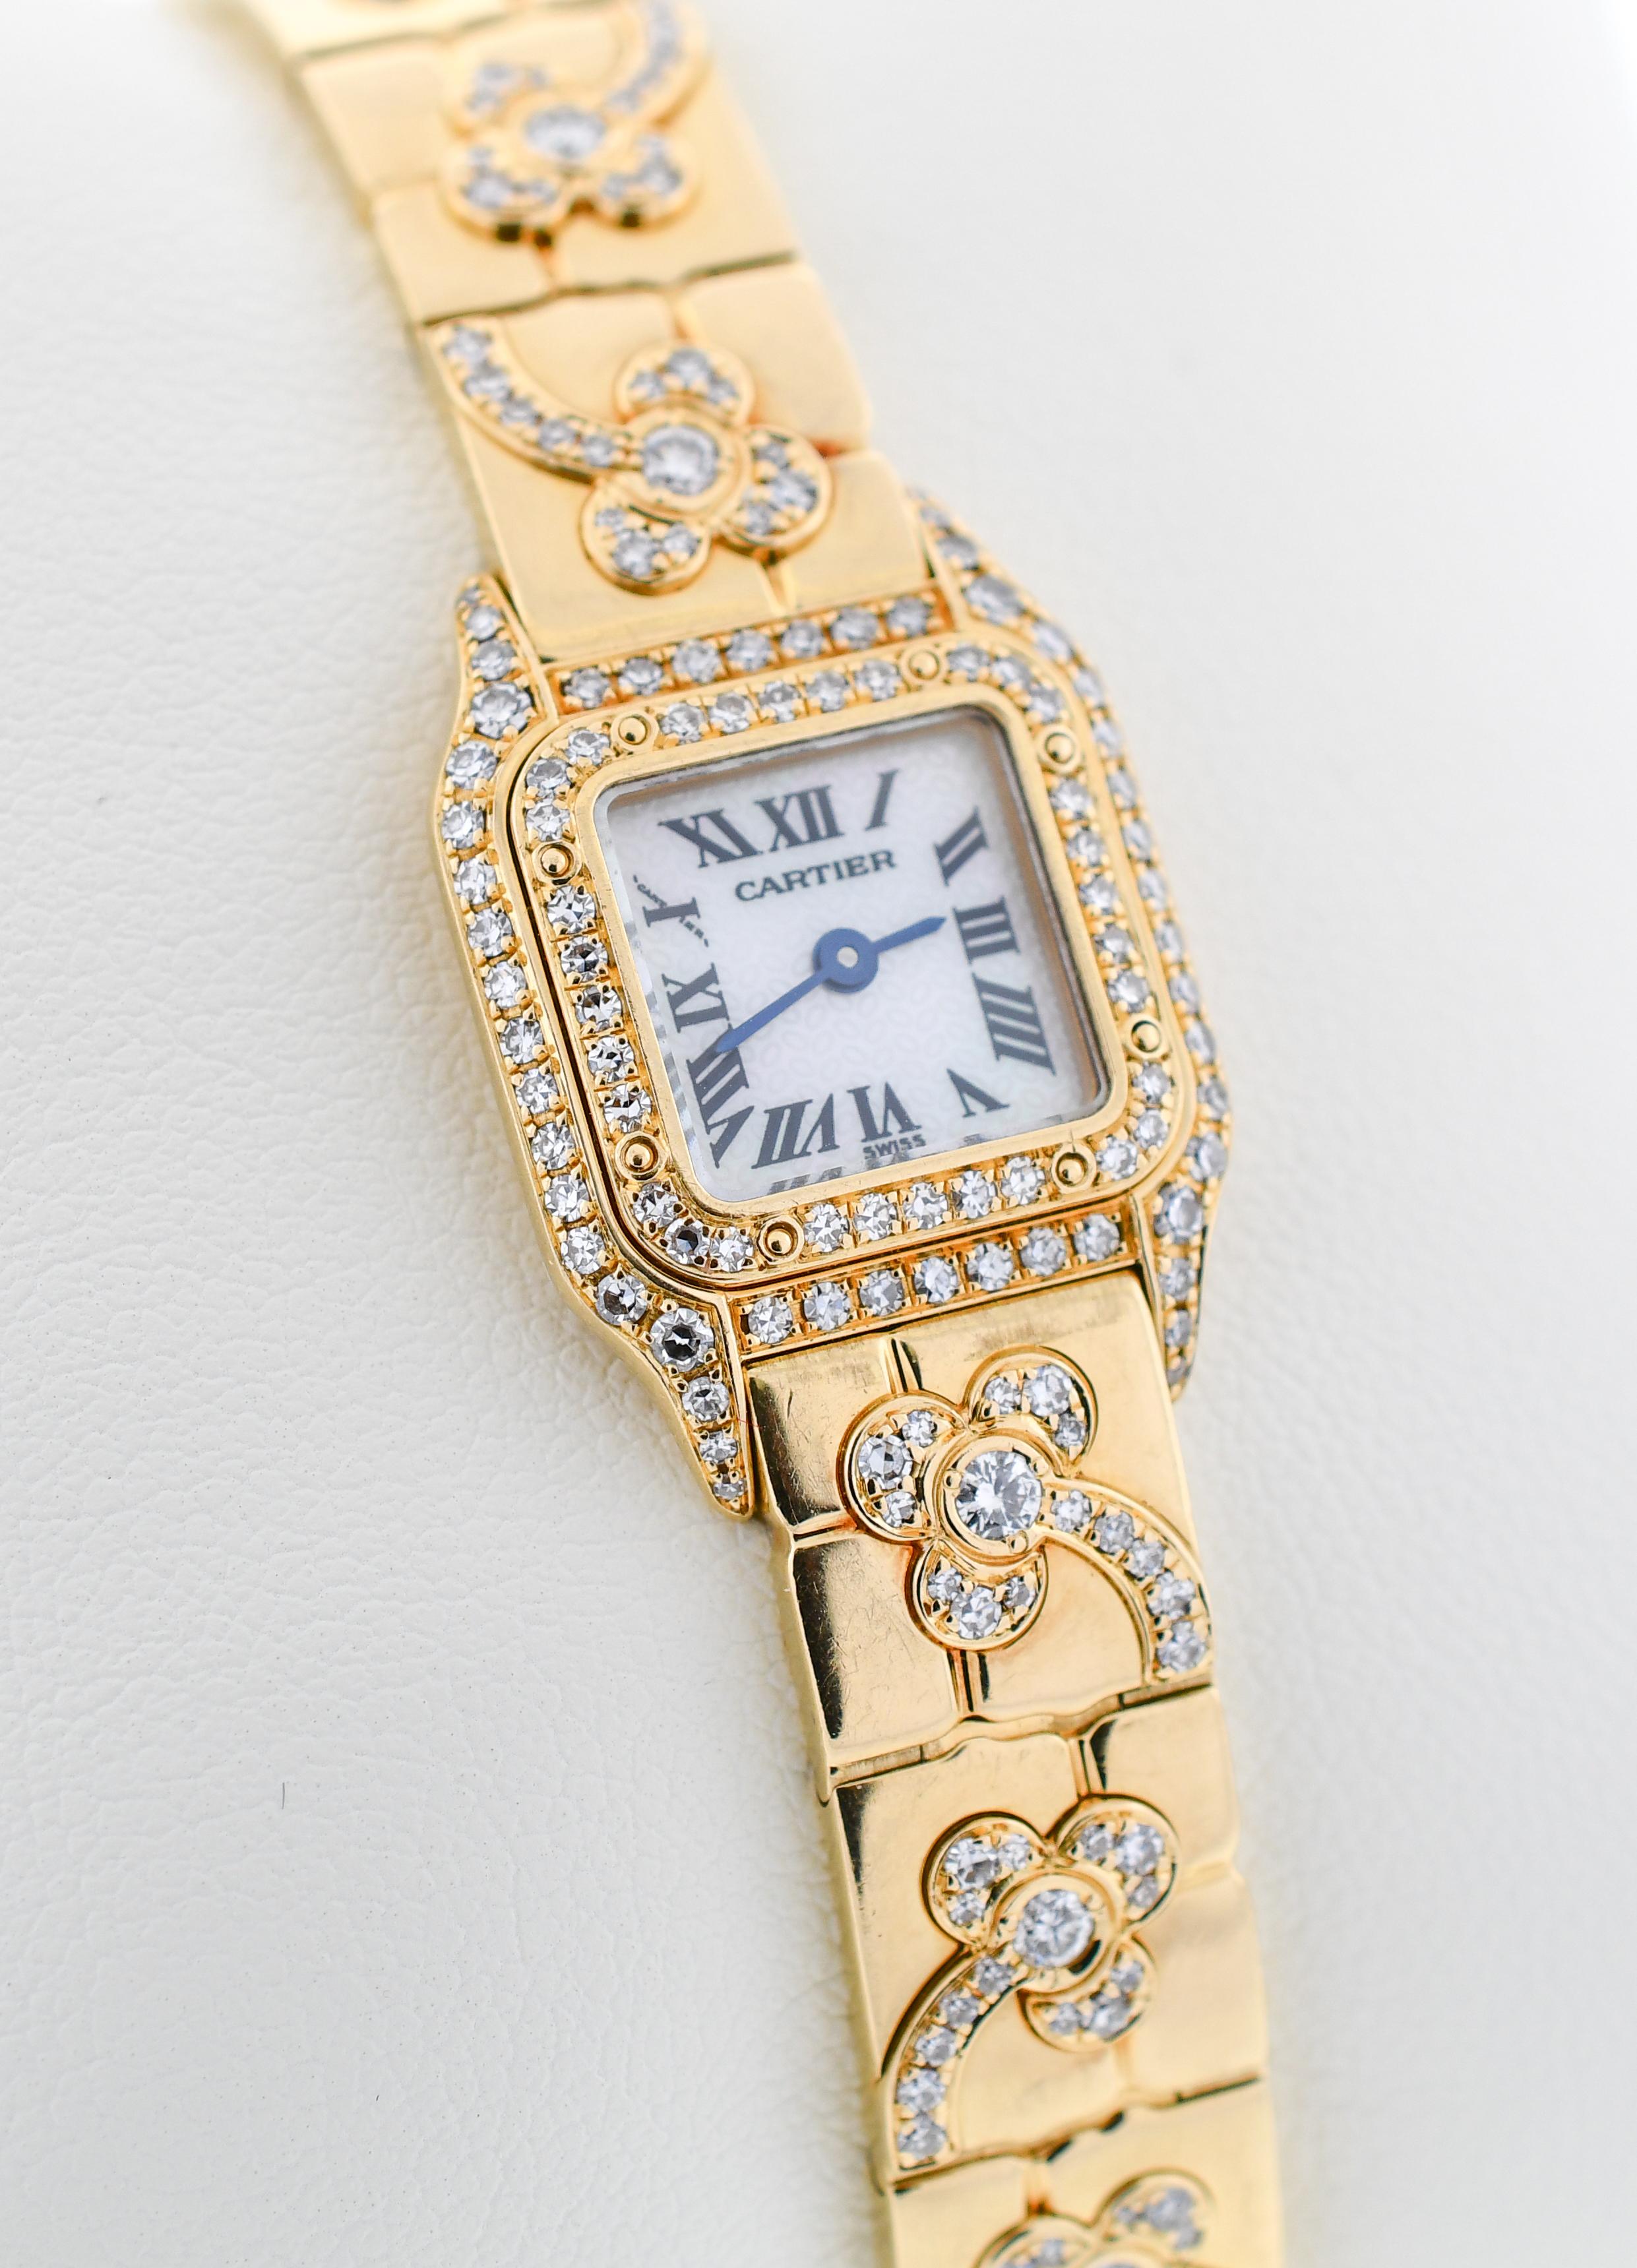 18 karat yellow gold flexible link bracelet accented by thirteen (13) diamond set flowers {each flower containing fifteen (15) round diamonds}.
The wristwatch features a double row diamond set bezel with diamond set lugs accented by eighty four (84)